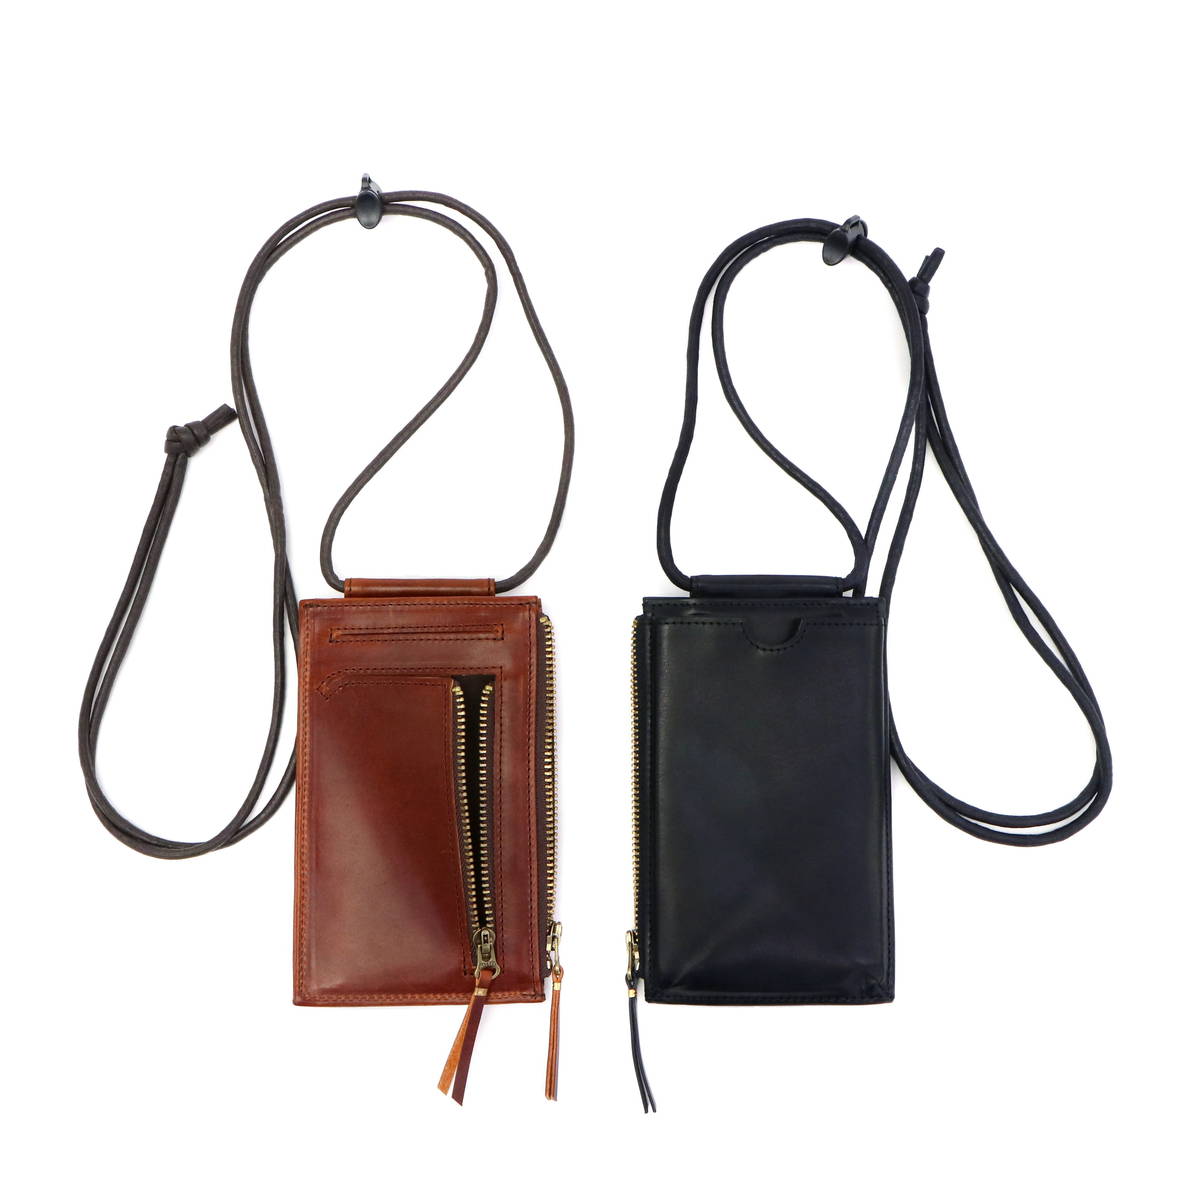 SLOW スロウ herbie neck pouch wallet ネックウォレット SO740I 